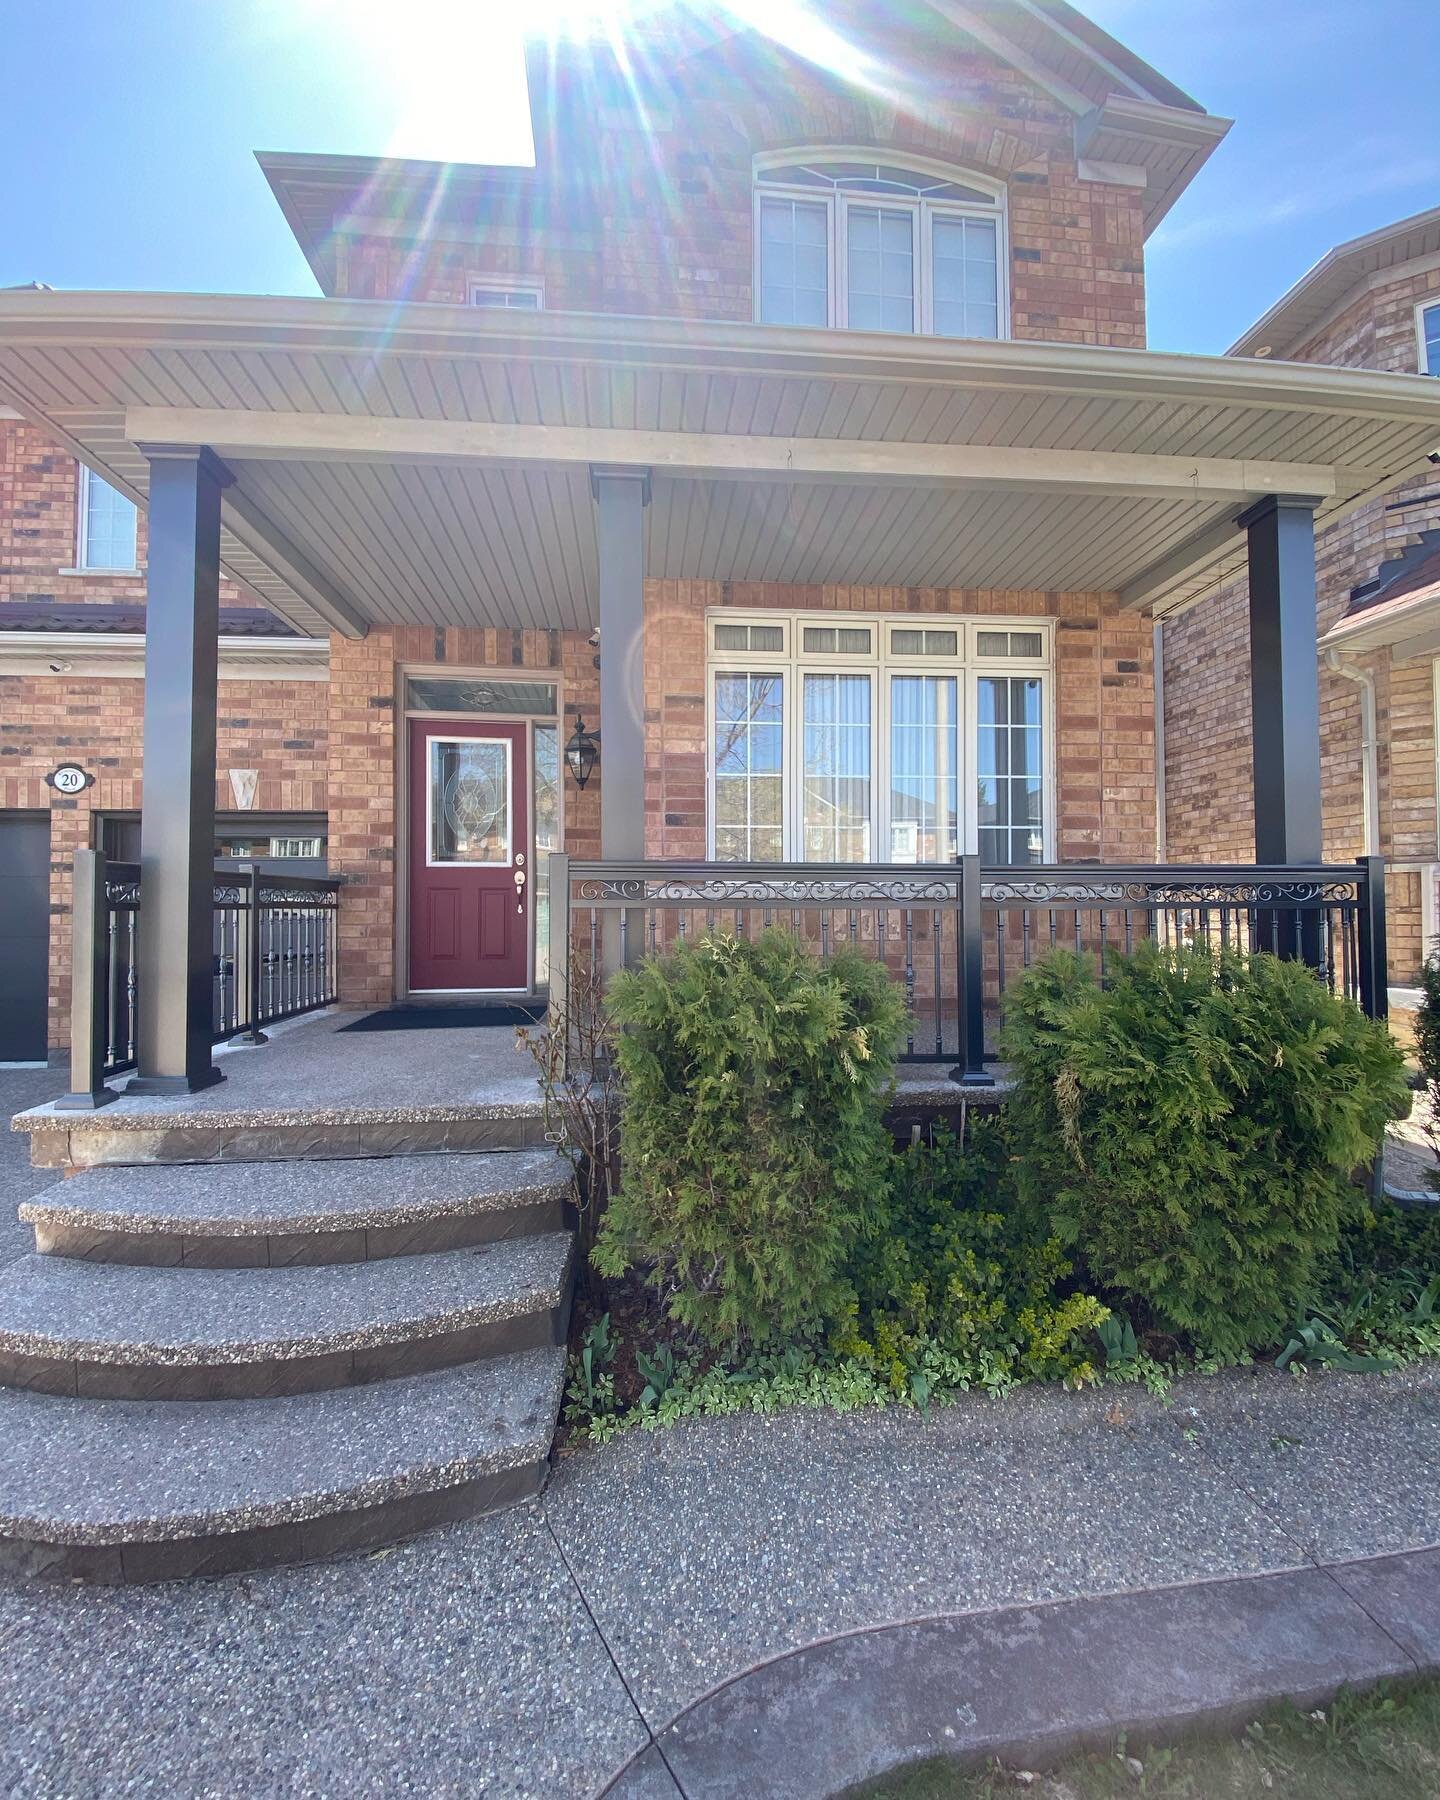 French Pickets with a Scroll (R20) to accent this beautiful pewter railing and columns in Brampton
&bull;
&bull;
&bull;
&bull;
&bull;

#railing #aluminumrailing #gta #yorkregion #contractor #building #backyarddesign #glassrailing #renovation #landsca